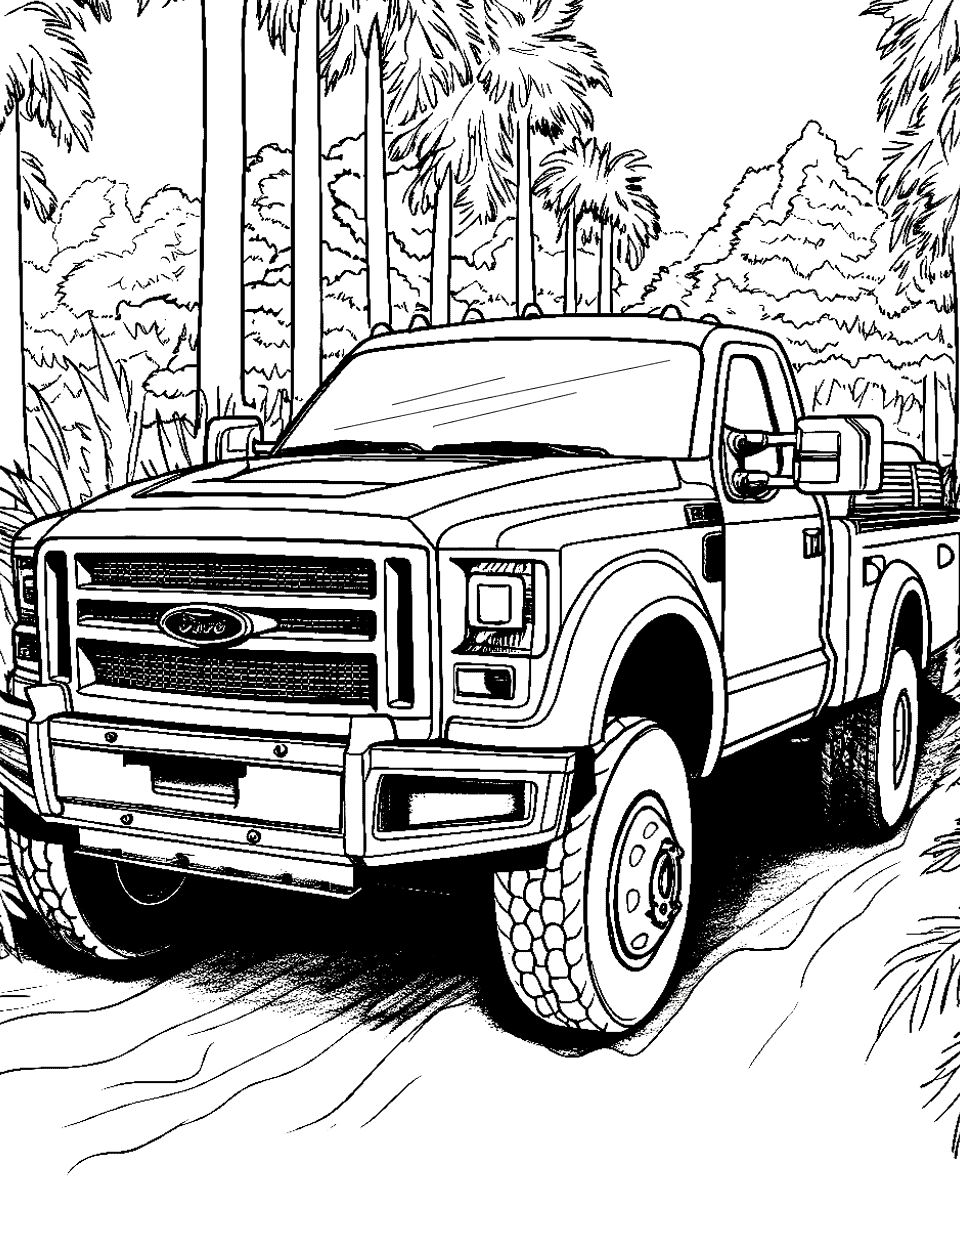 Raptor in the Jungle Coloring Page - A Ford Raptor driving through a path in a dense but simple jungle scene.